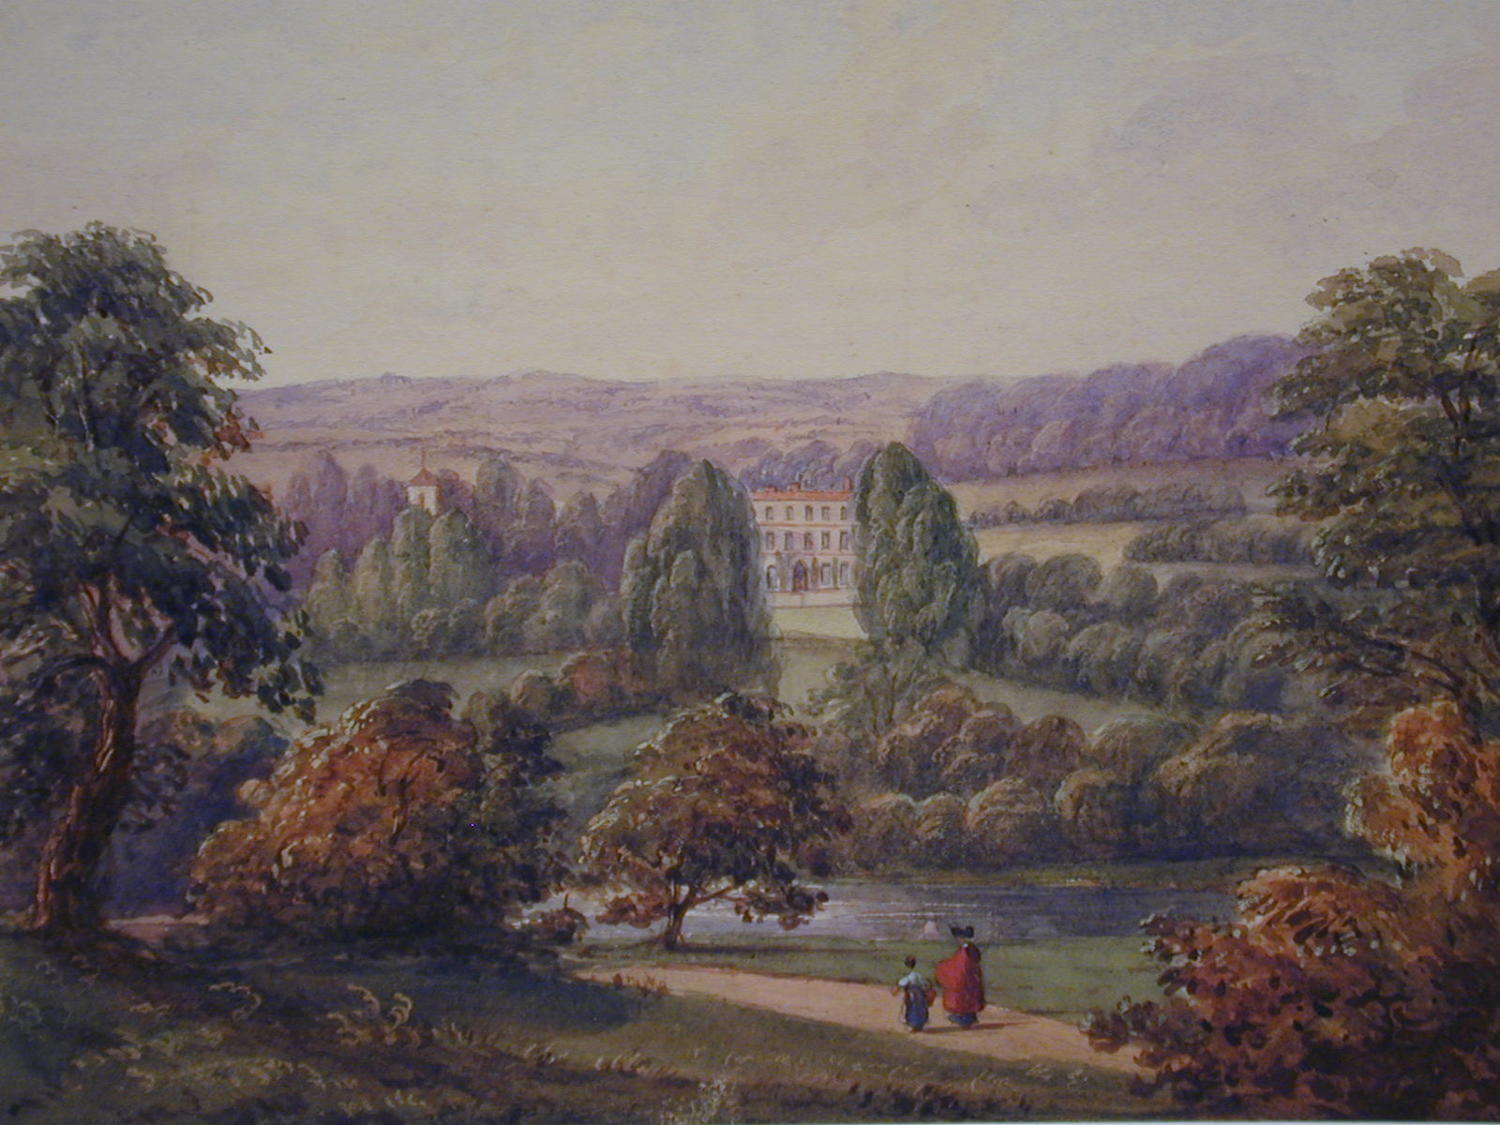 Watercolour, Burford House, Shropshire by the Hon. Harriet Rushout